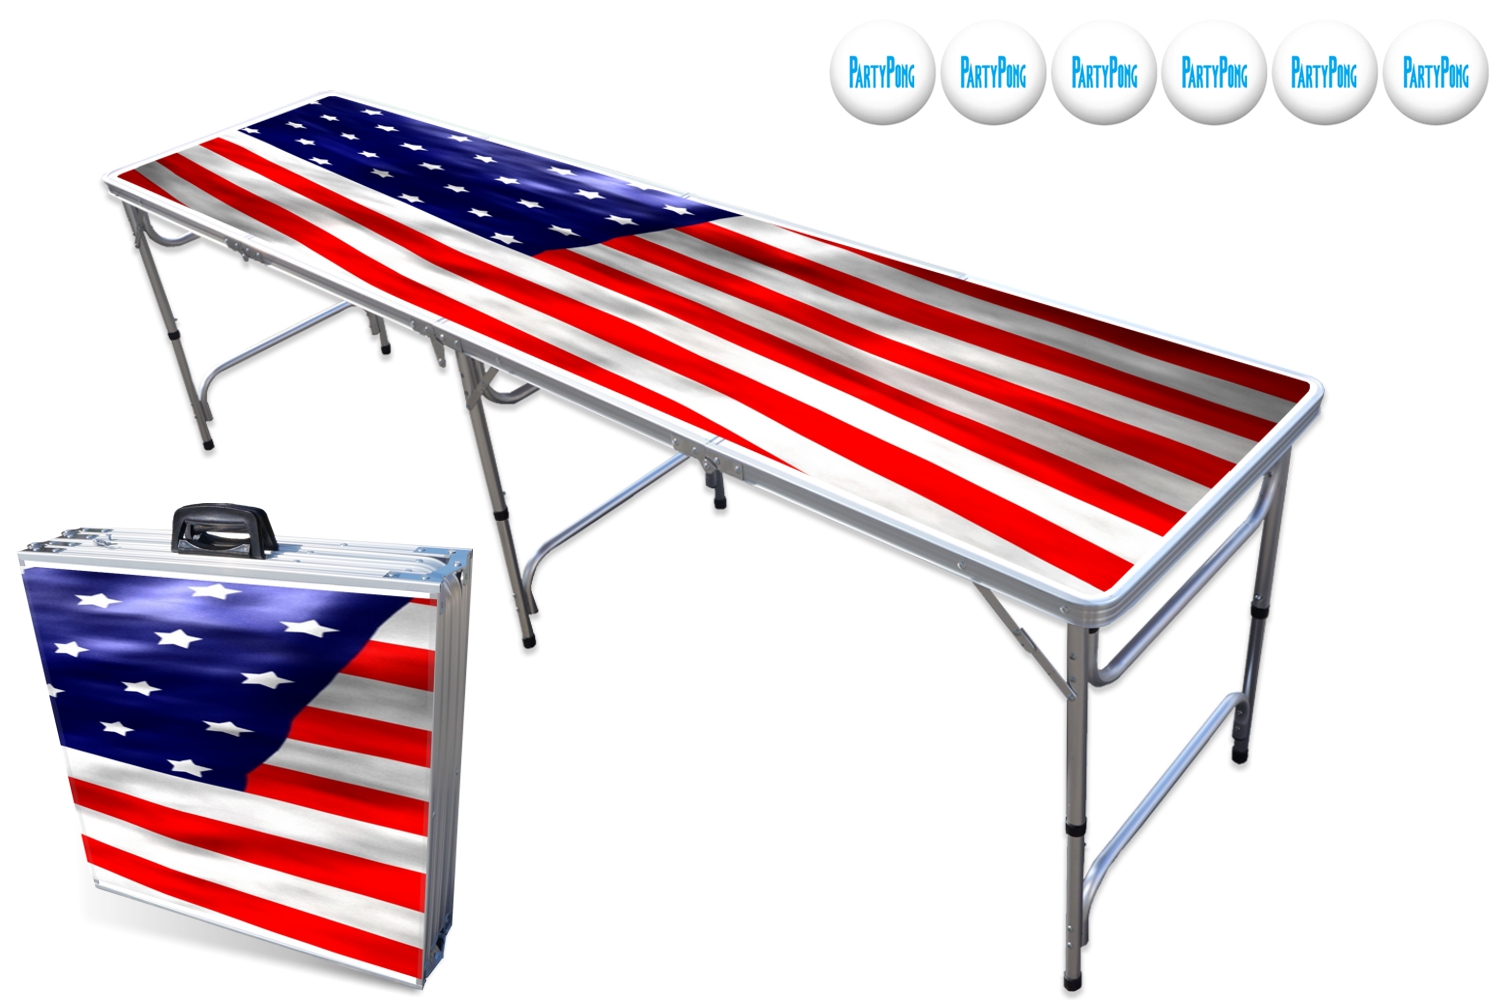 8-Foot Professional Beer Pong Table w/ OPTIONAL Cup Holes, LED Lights, Dry Erase Surface &amp; Party Pong Graphics - Choose Your Table Model